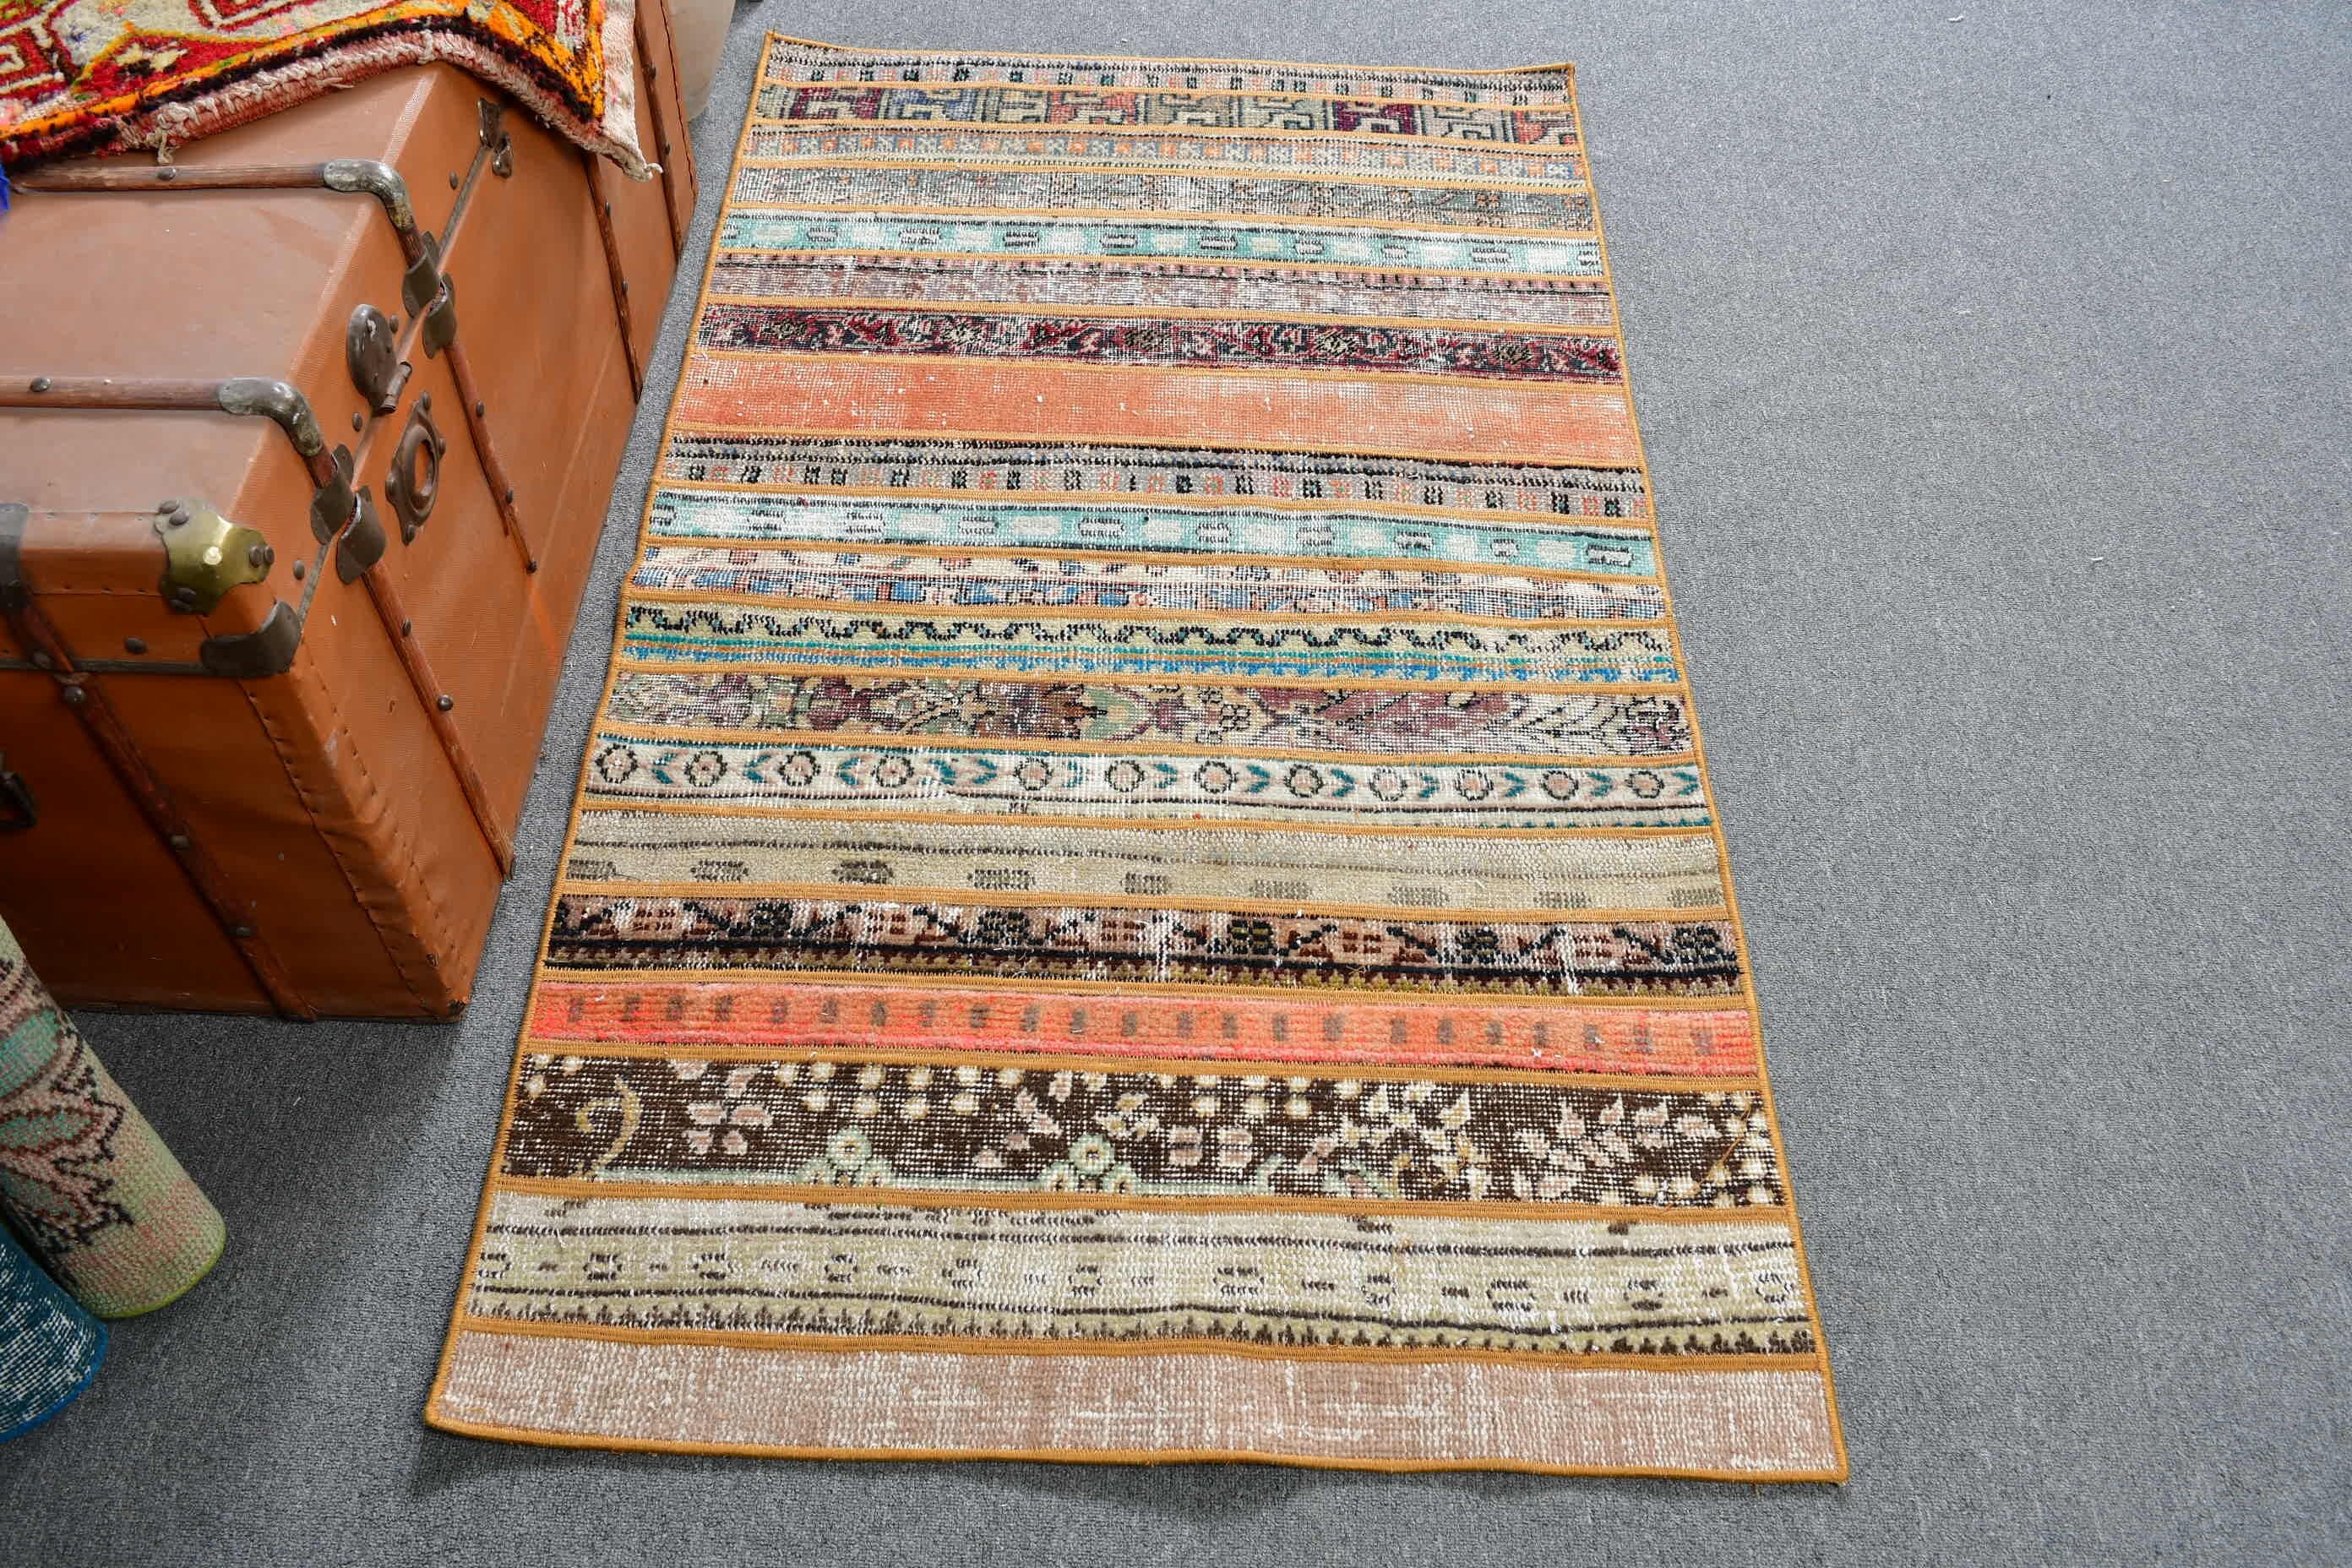 Rugs for Entry, Oushak Rug, Kitchen Rugs, Vintage Decor Rug, Moroccan Rugs, Vintage Rug, Turkish Rugs, Bedroom Rug, 3x5.1 ft Accent Rug